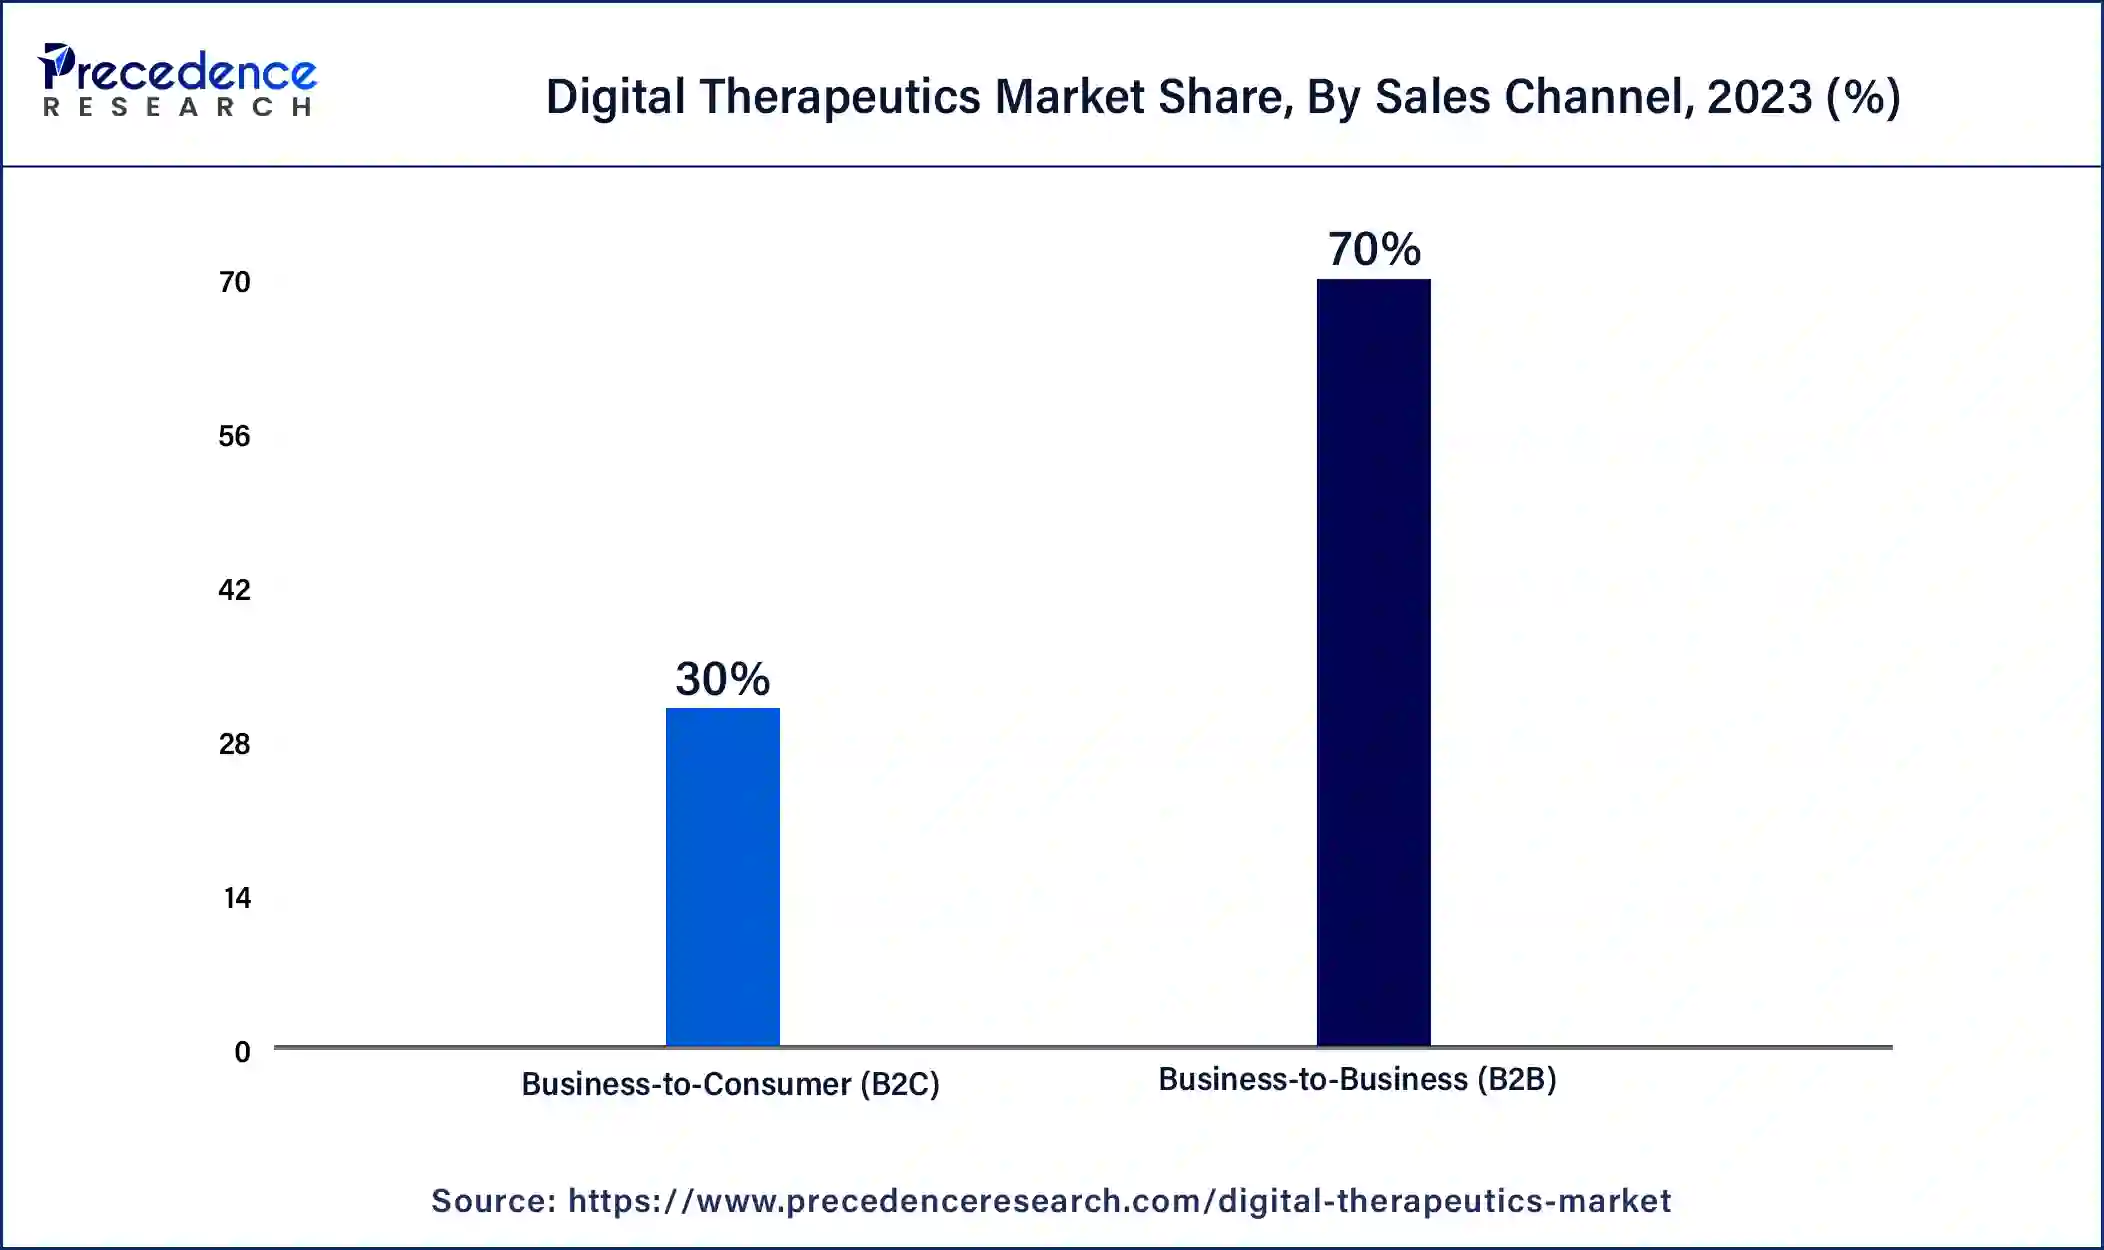 Digital Therapeutics Market Share, By Sales Channel, 2023 (%)